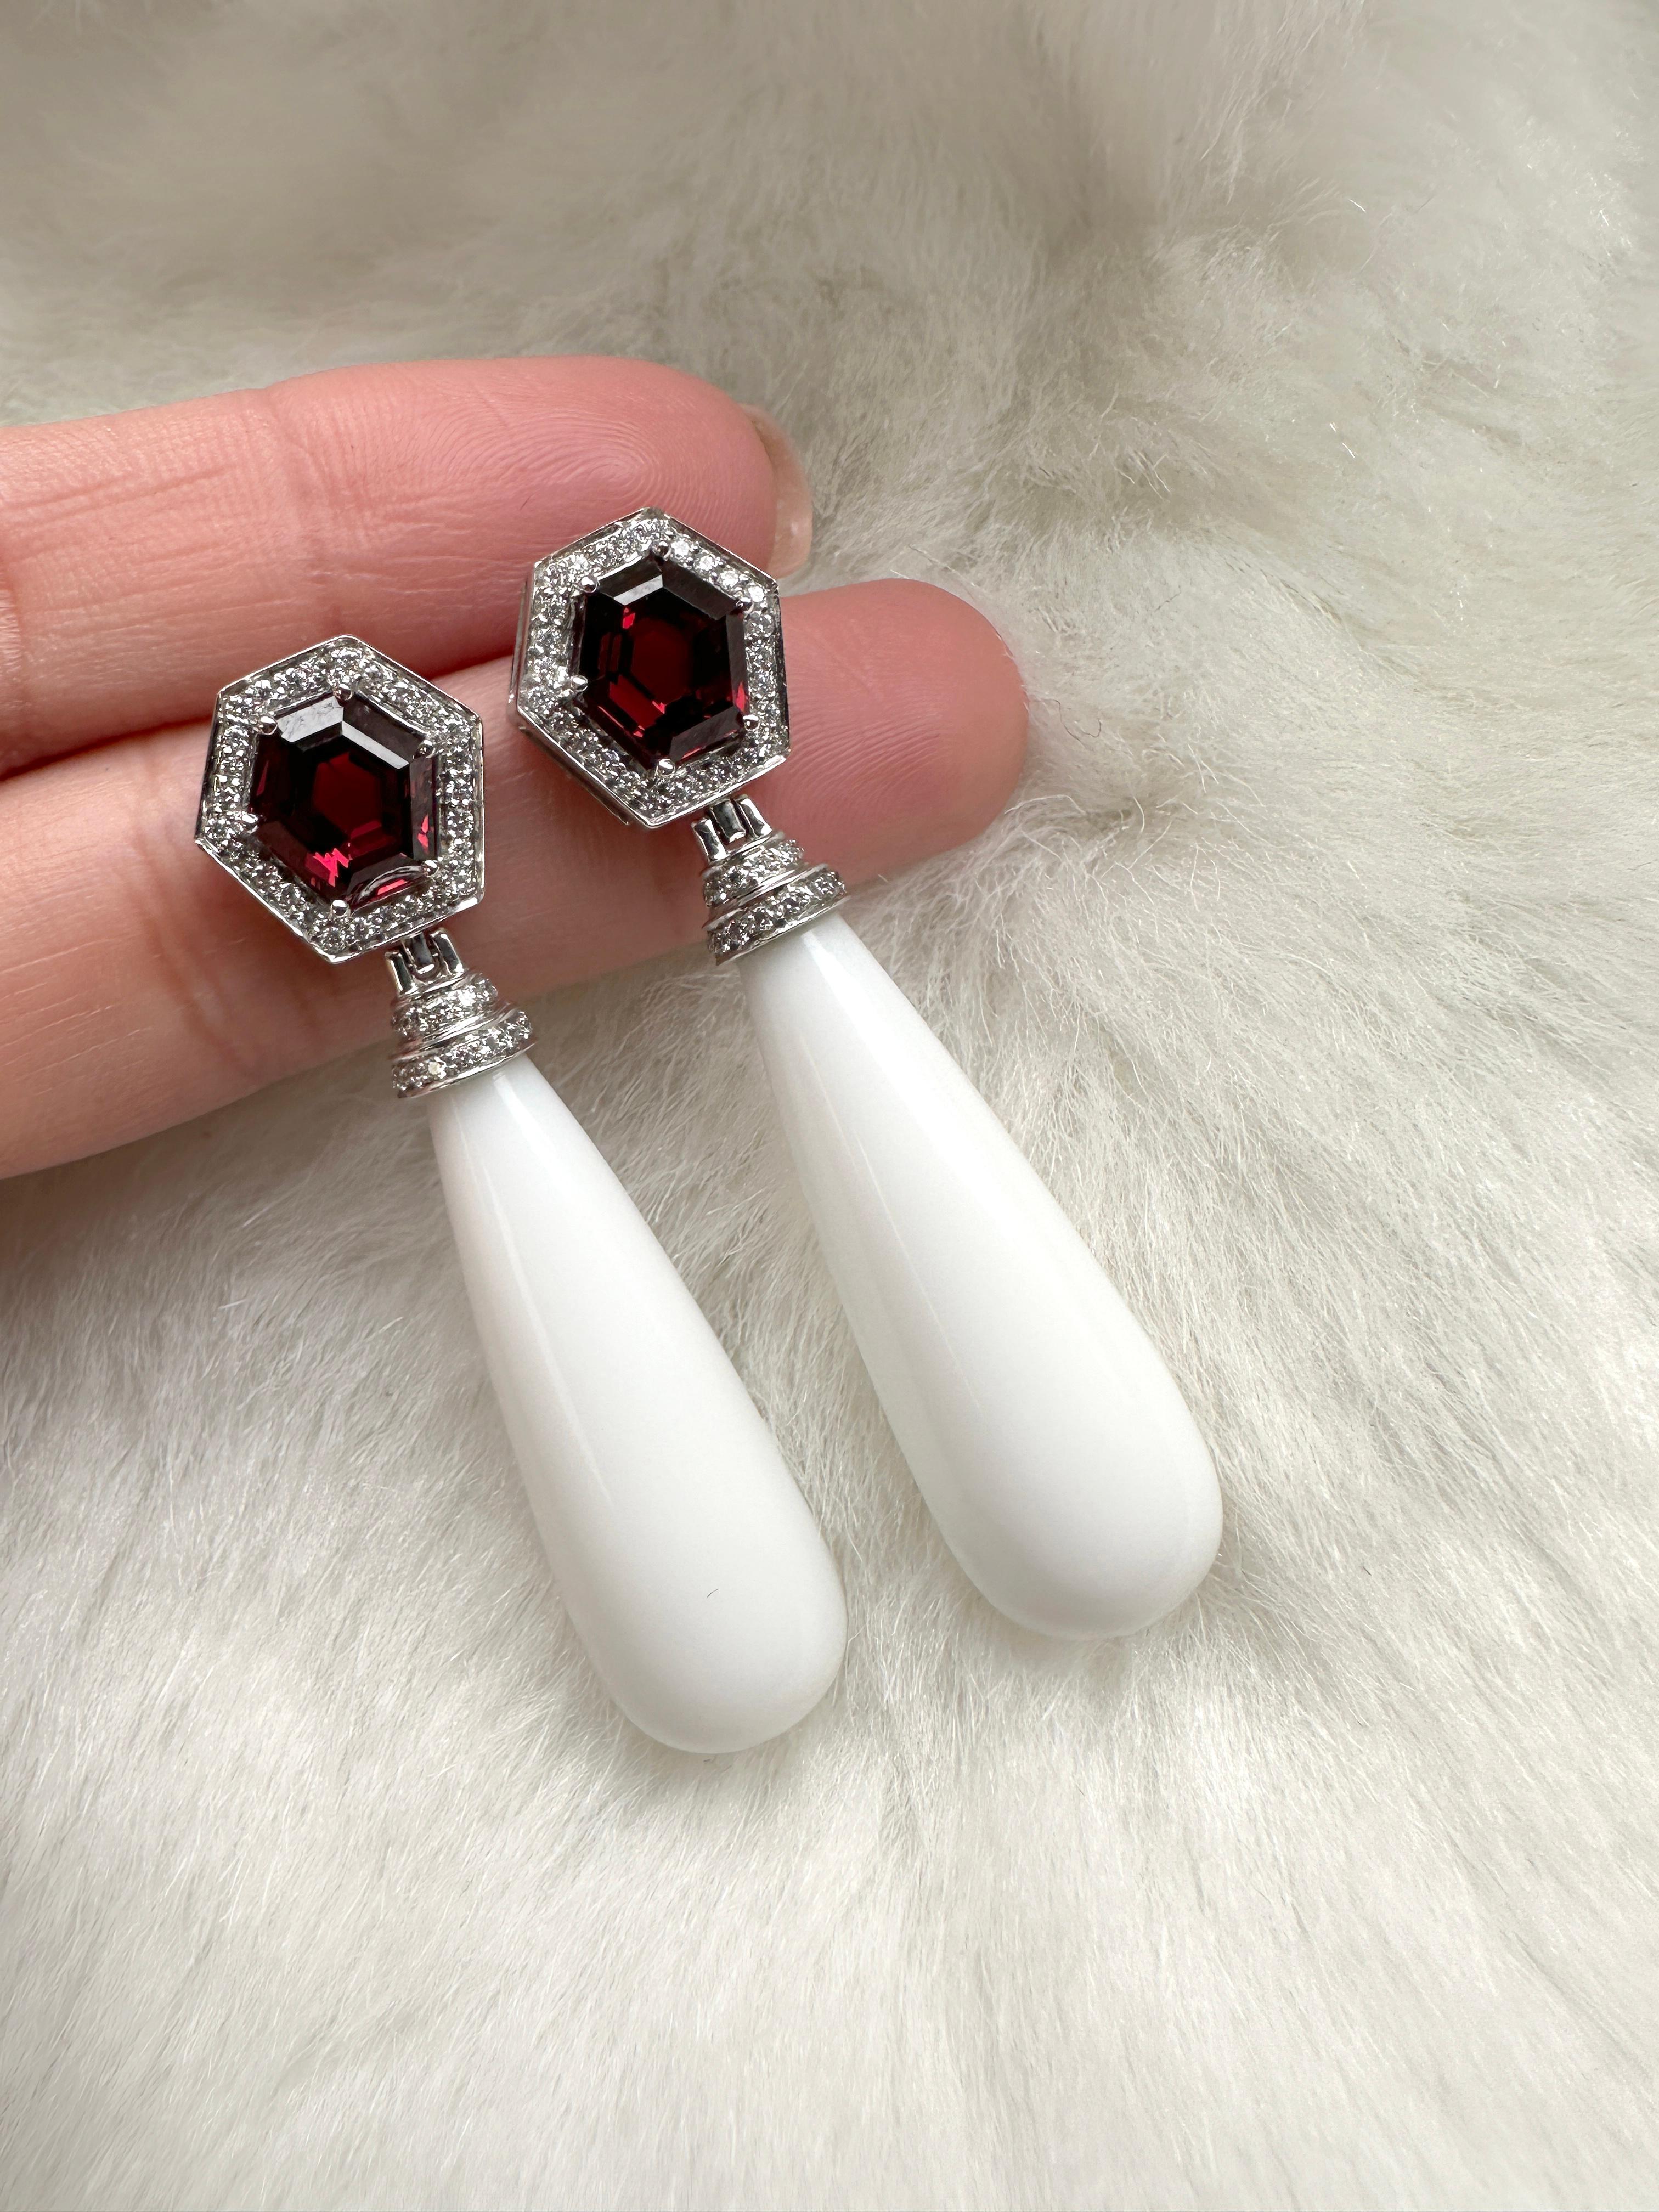 These Garnet & Fancy Cut White Agate Drop Earrings with diamond in 18K White Gold from the 'G-One' Collection are a stunning piece of jewelry that exudes elegance and sophistication. The earrings feature deep red garnets and white agate gemstones,